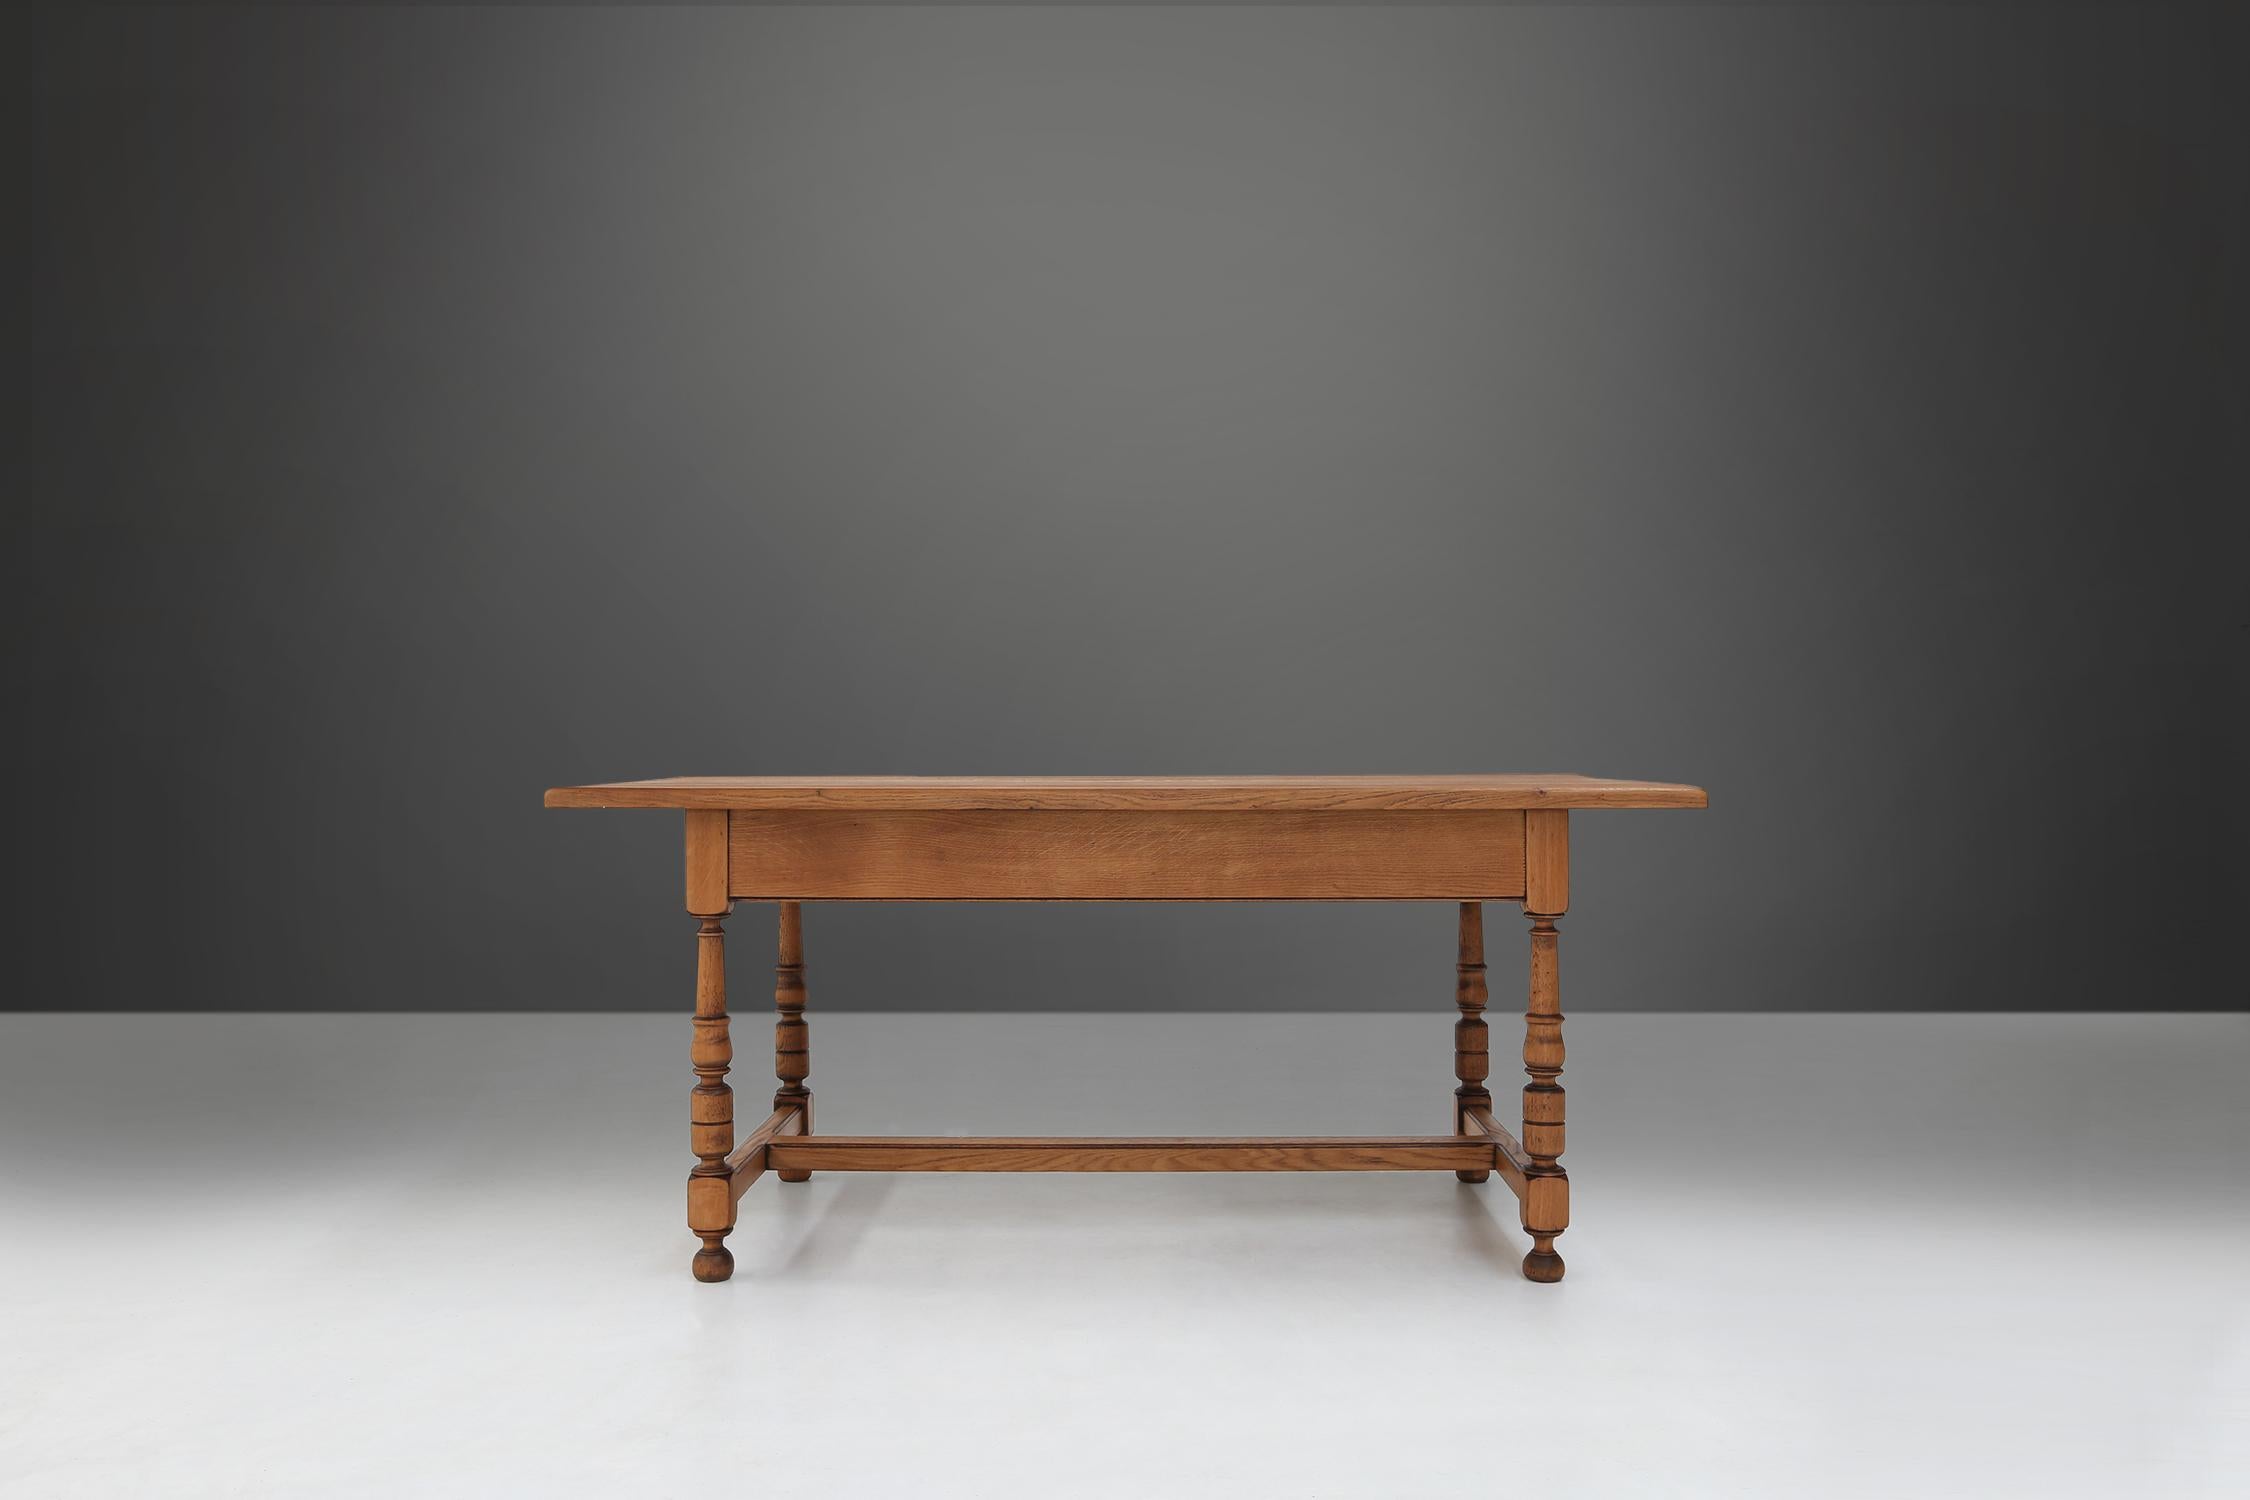 This 20th century table is made of high-quality oak wood and has a light brown finish. The legs are twisted and have a spherical shape, giving the table an elegant and classic look.

The oak has a natural sheen that gives it a rustic charm.

The